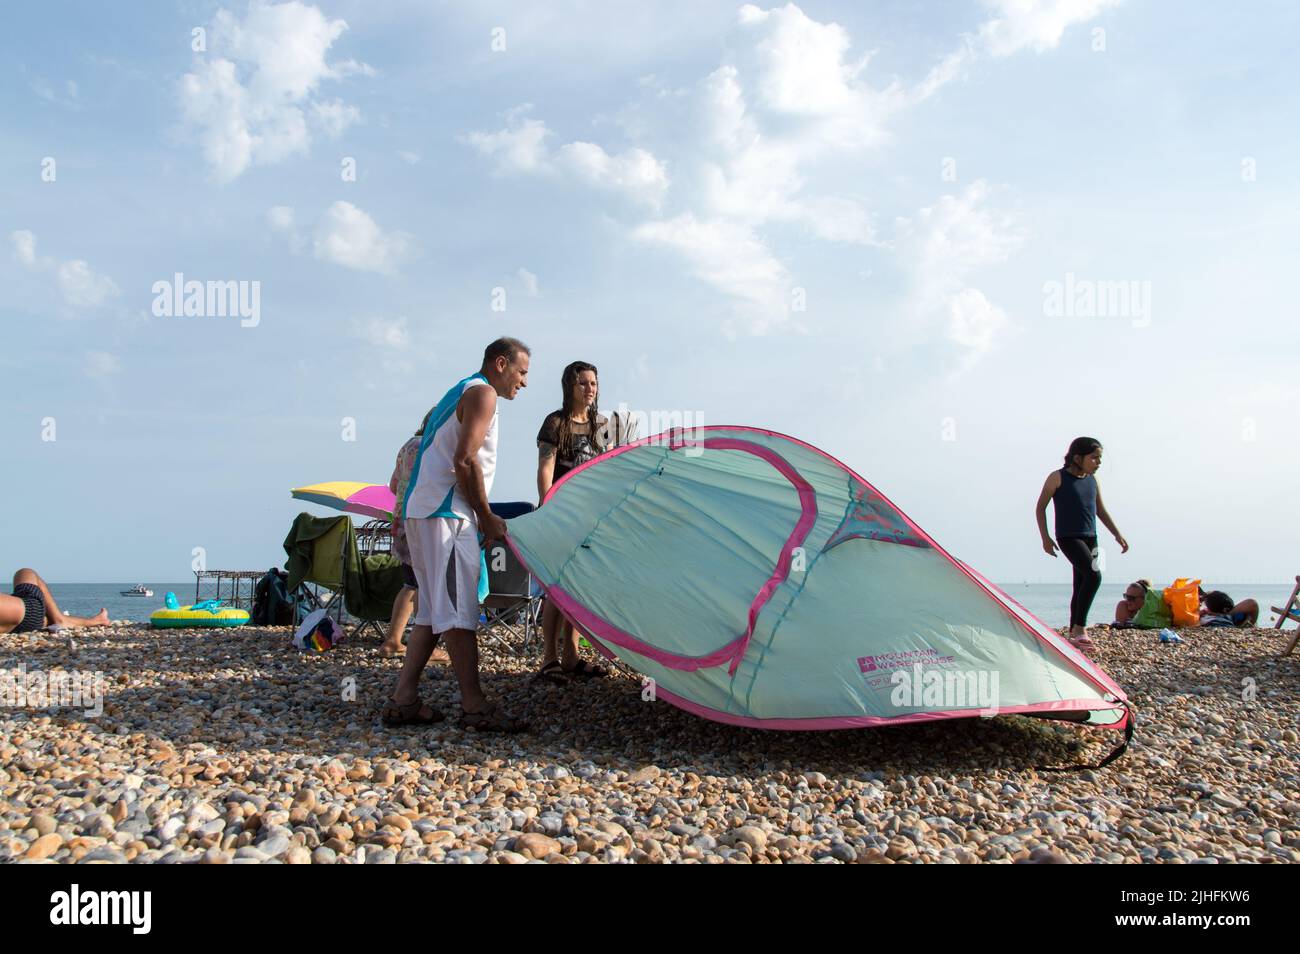 Couple putting up tent in Beach during hot weather Stock Photo